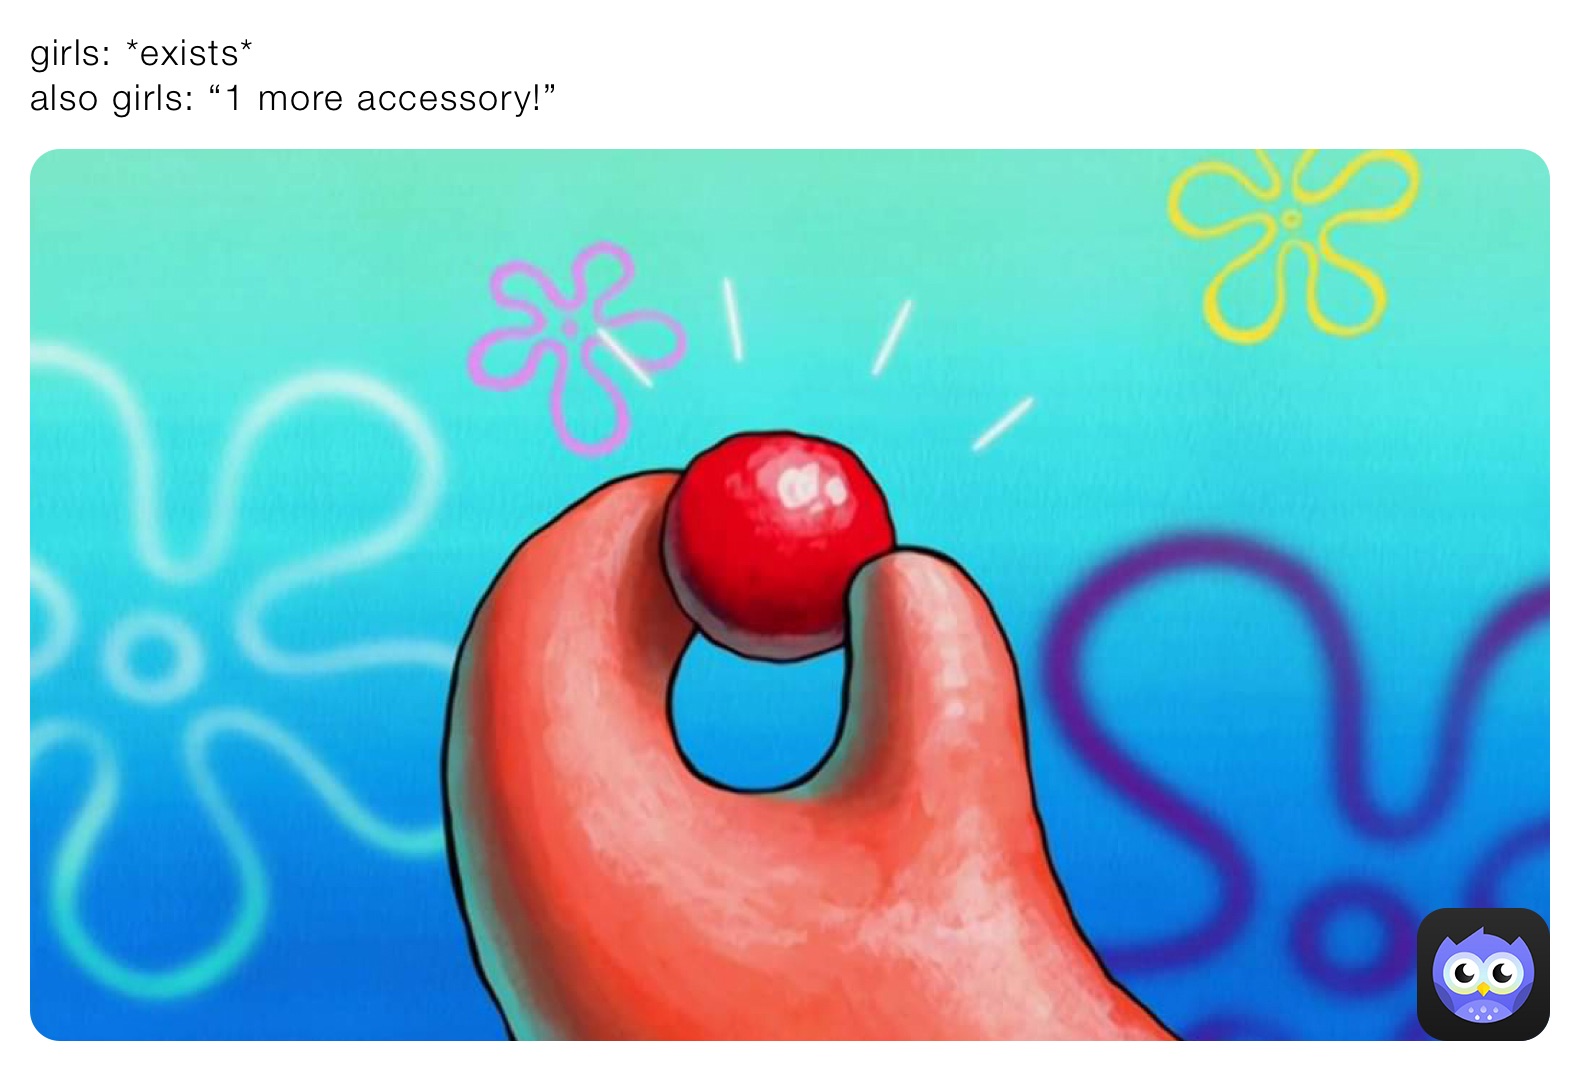 girls: *exists*
also girls: “1 more accessory!”